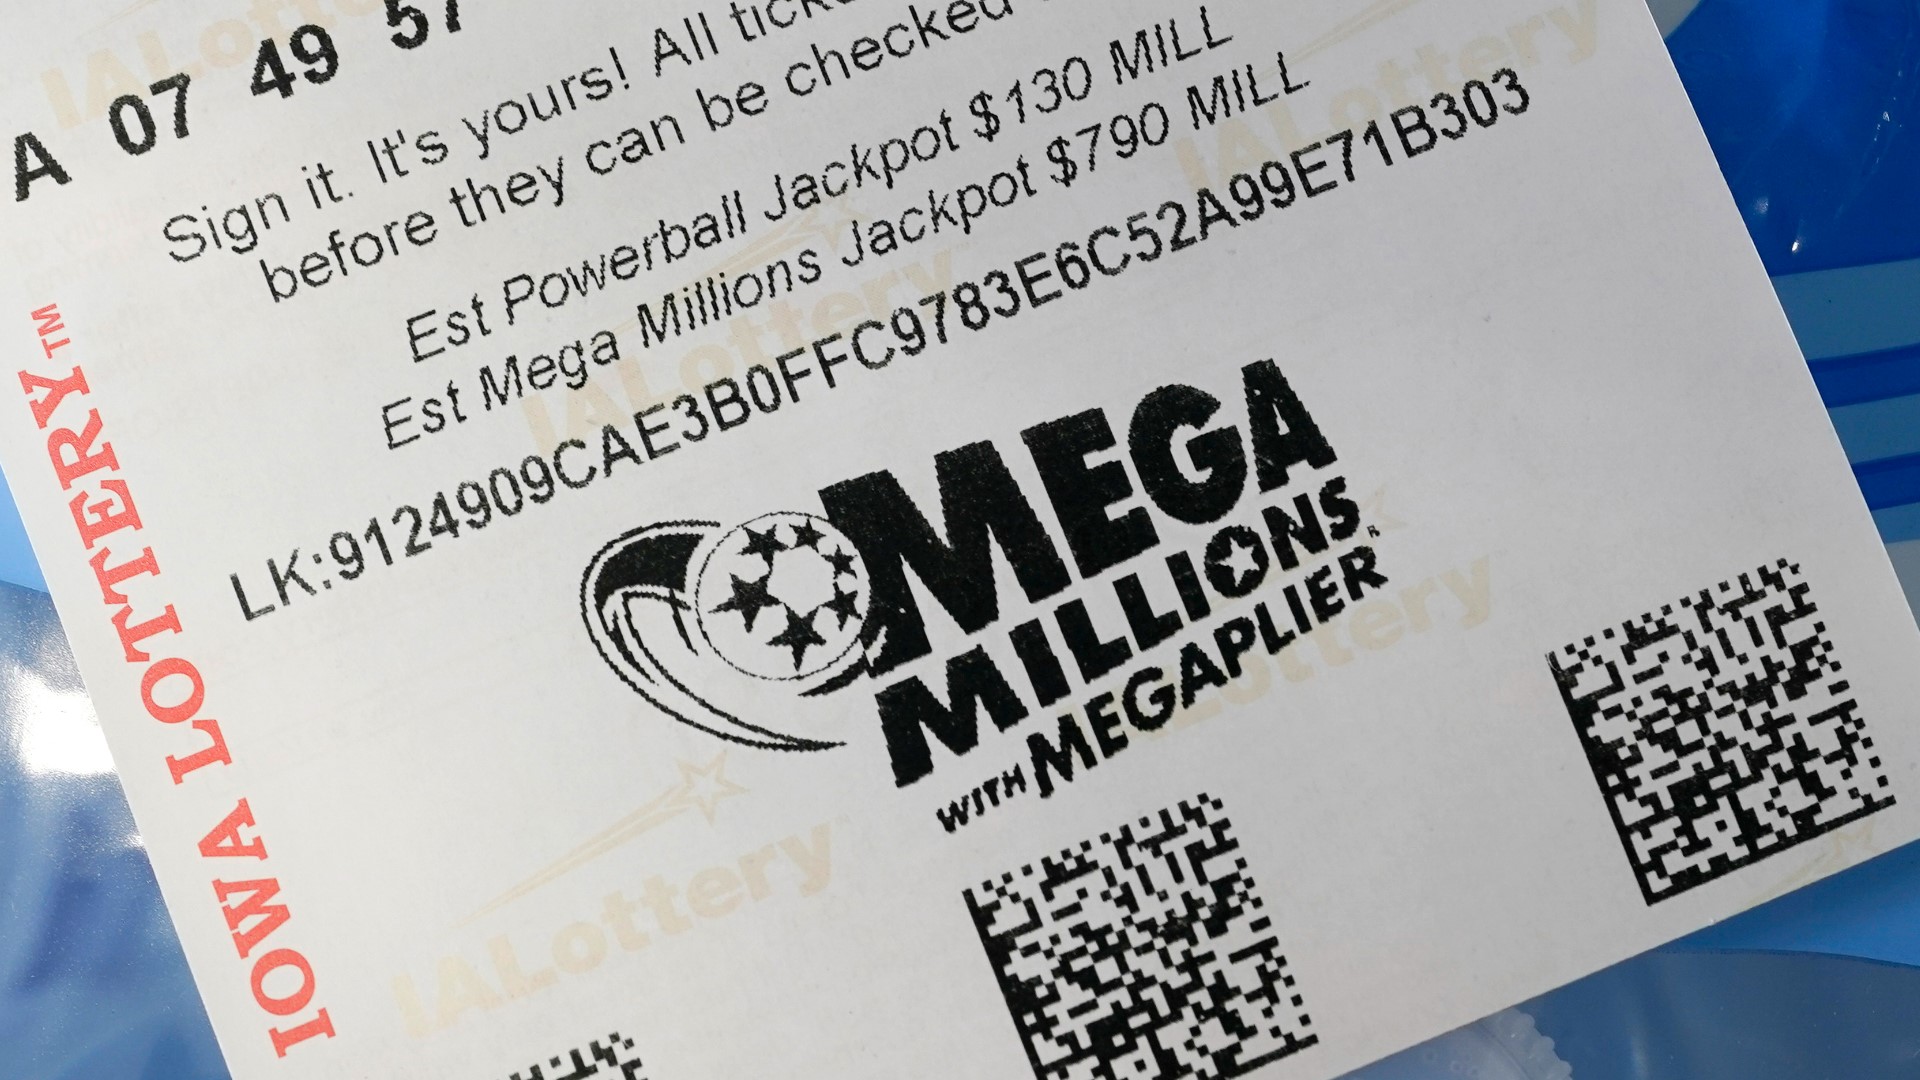 As things stand now, only a $1.537 billion jackpot has been higher for Mega Millions.